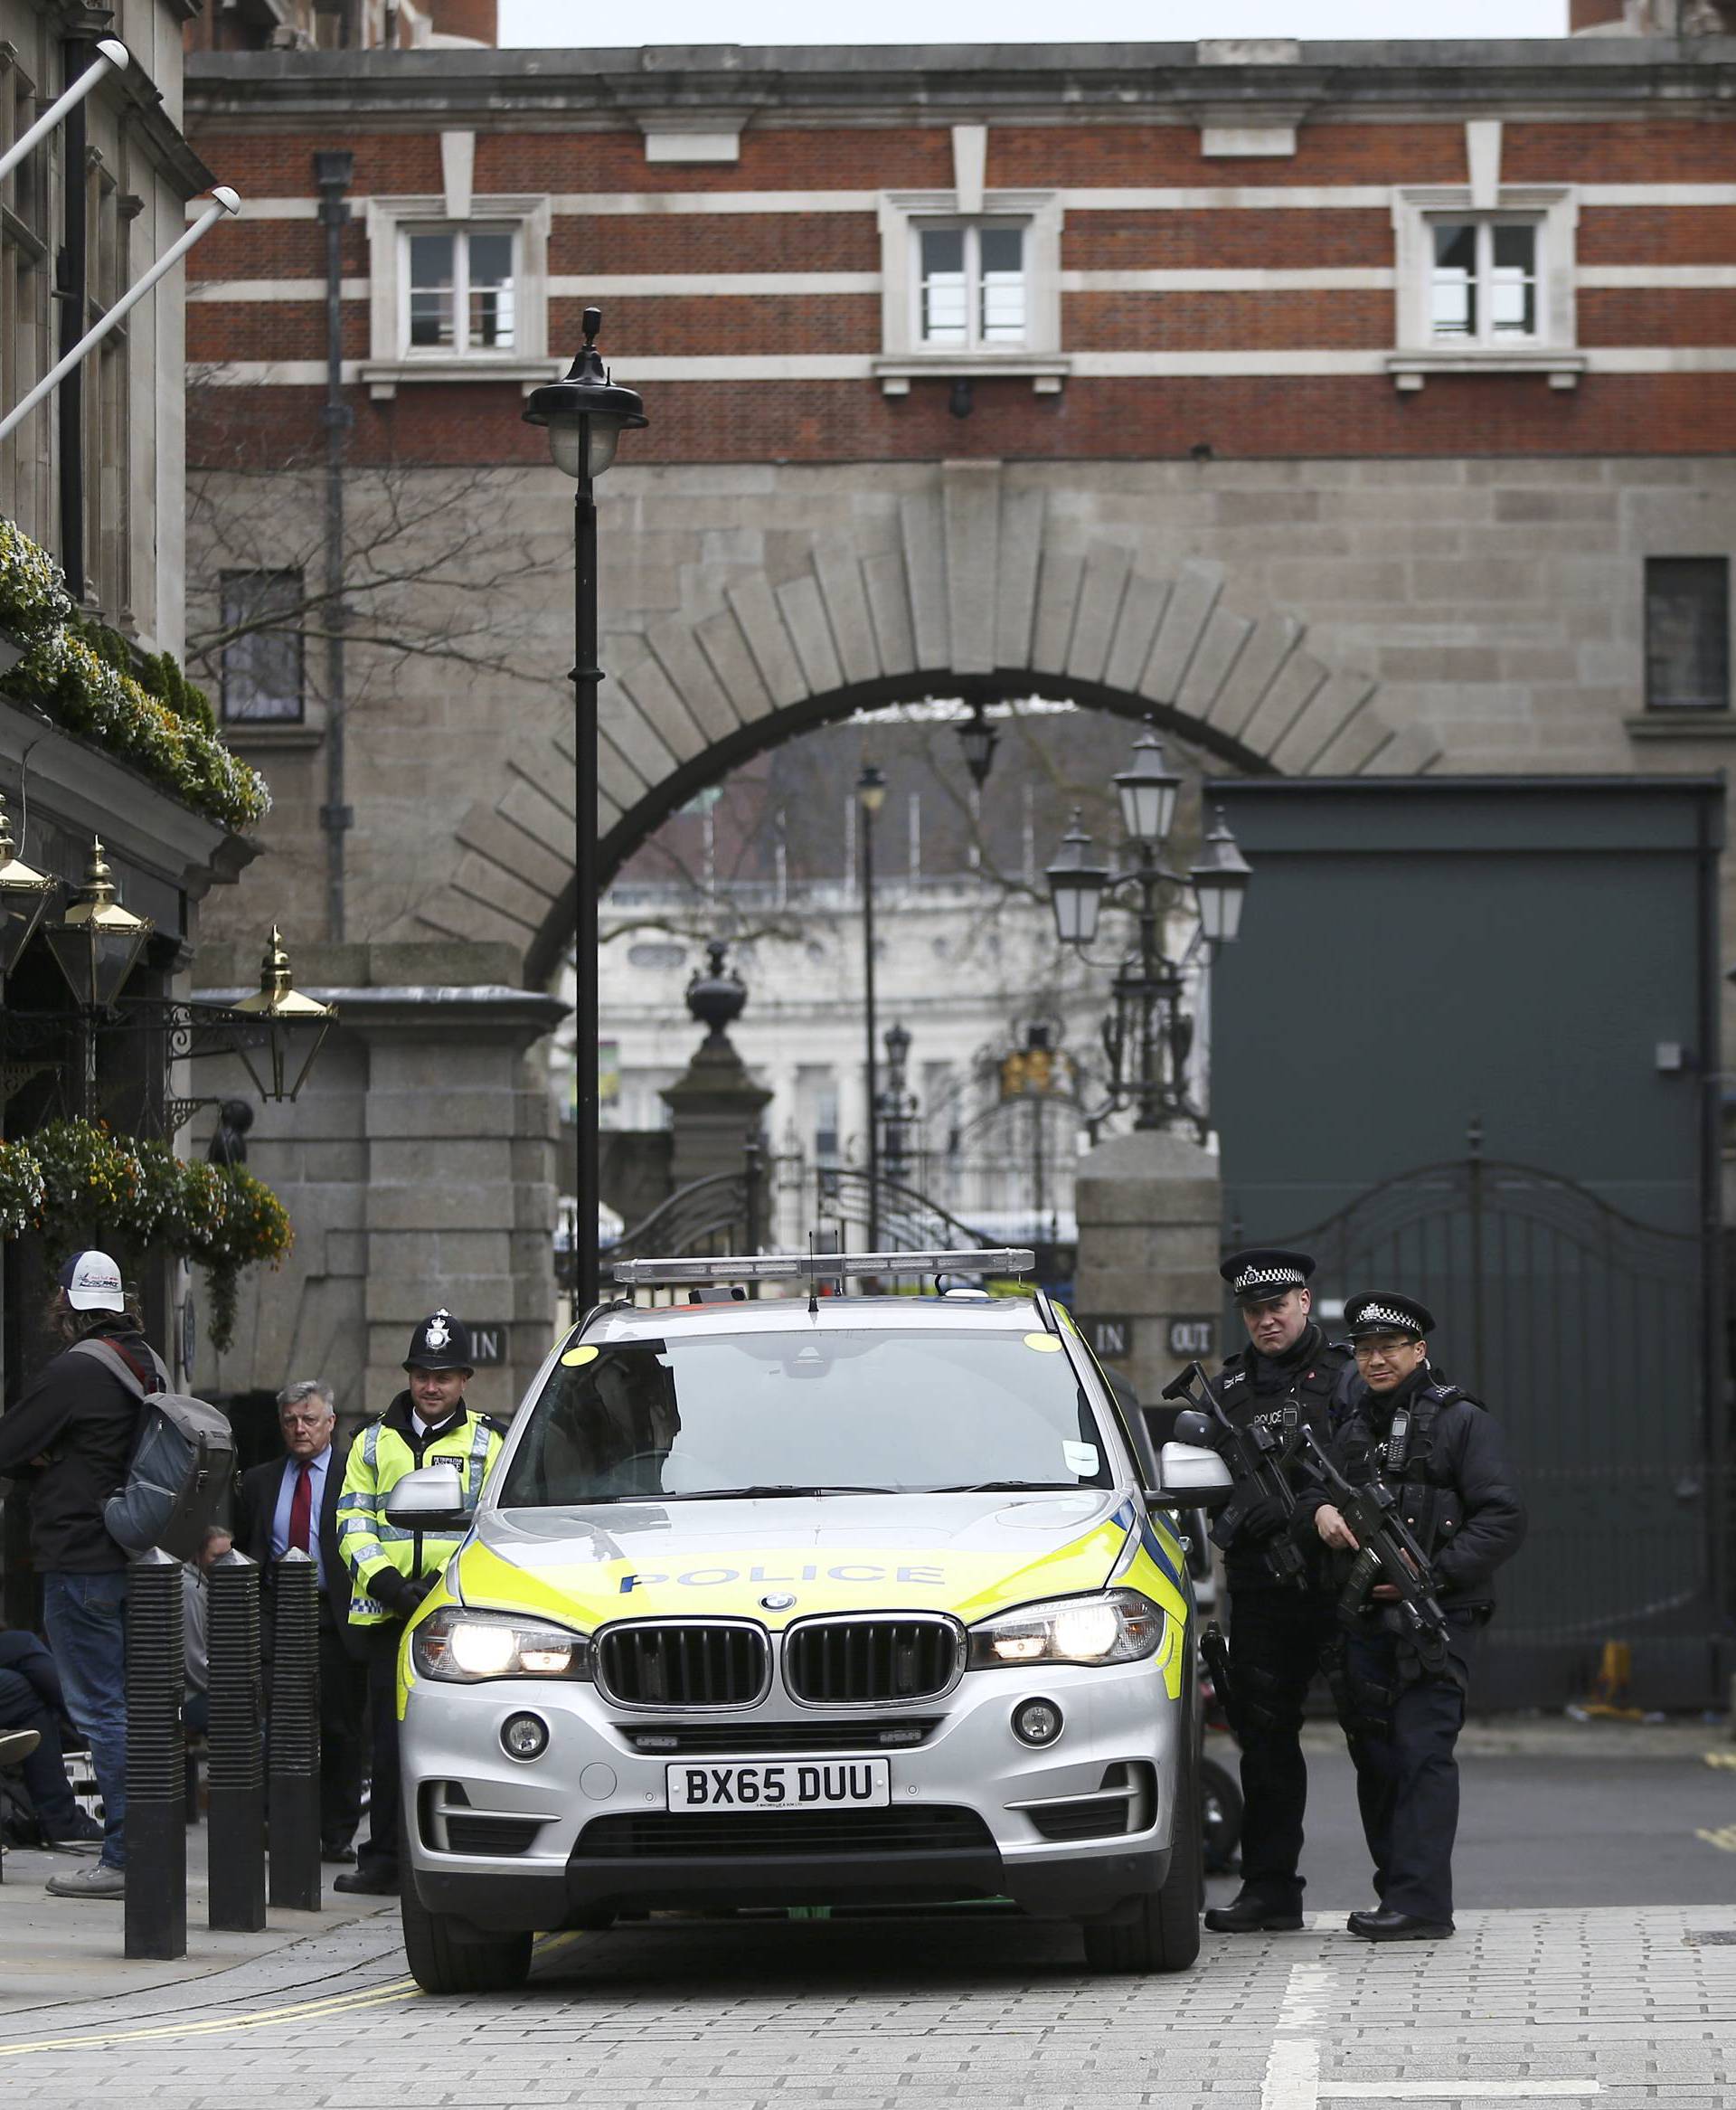 Armed police officers patrol Whitehall the morning after an attack in London